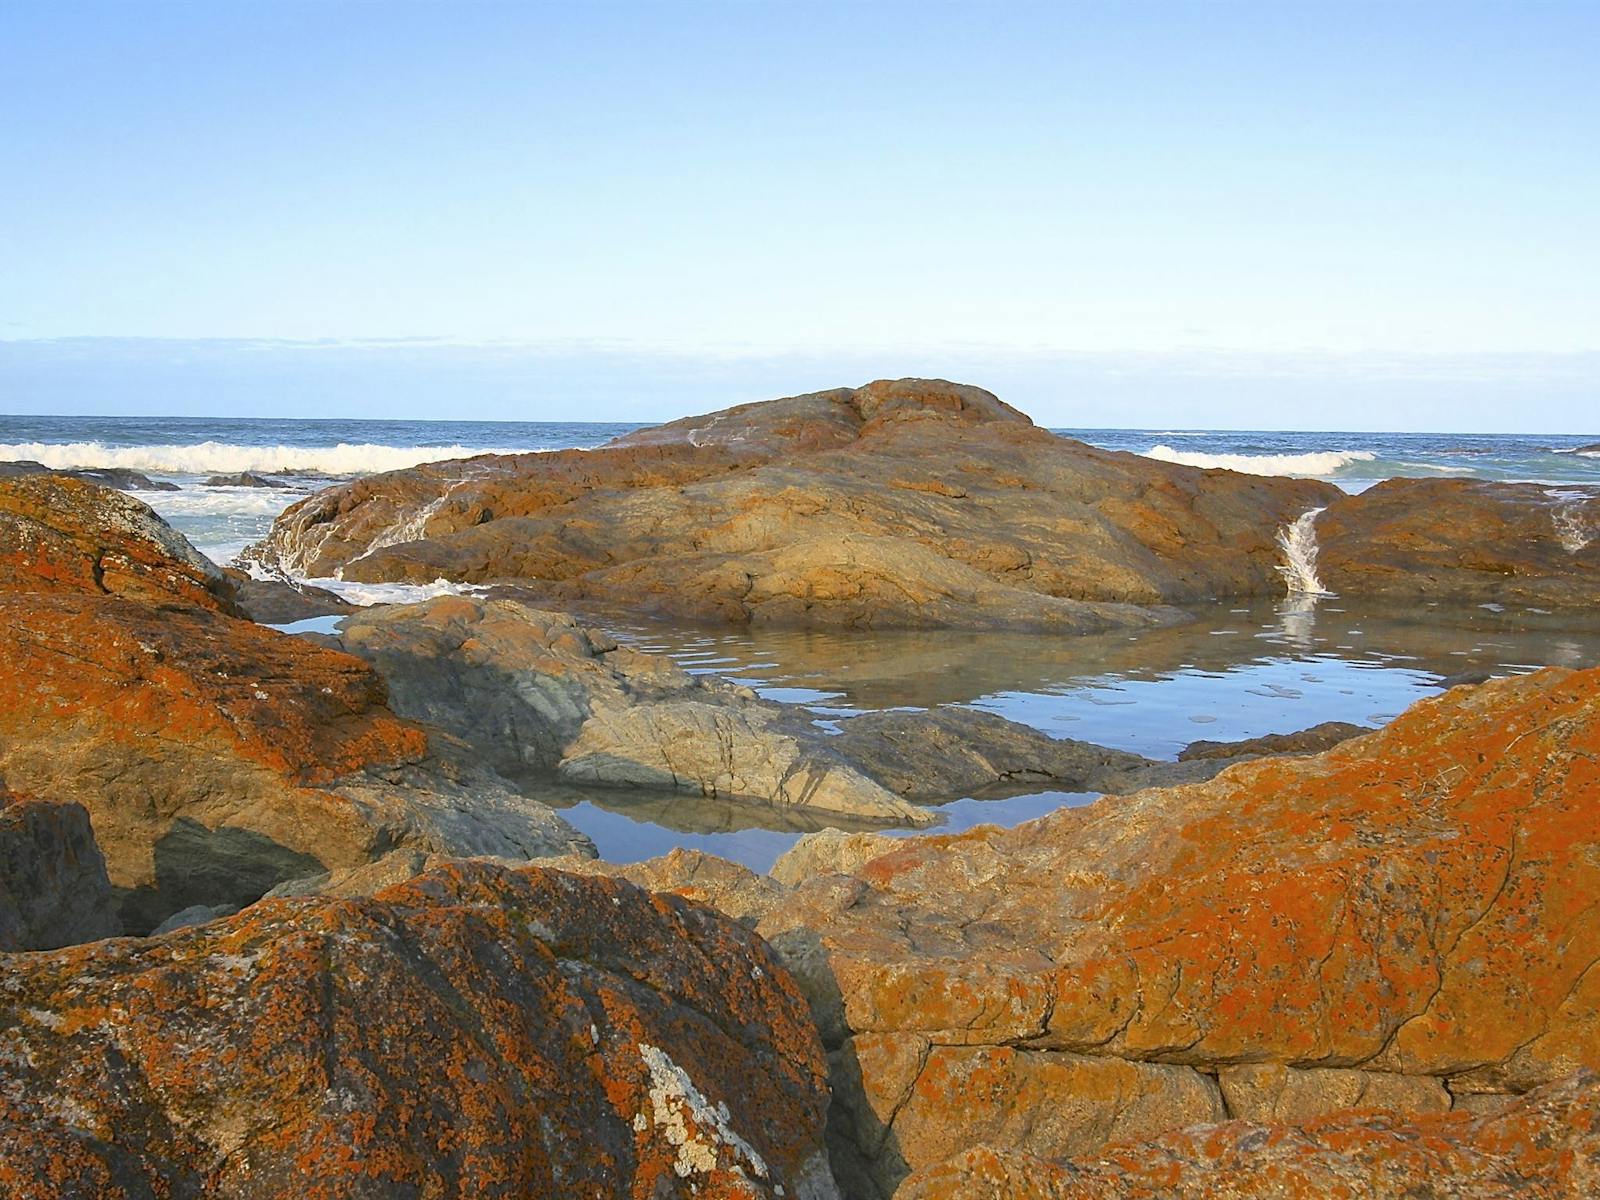 Iconic granite rock pools with cascading water